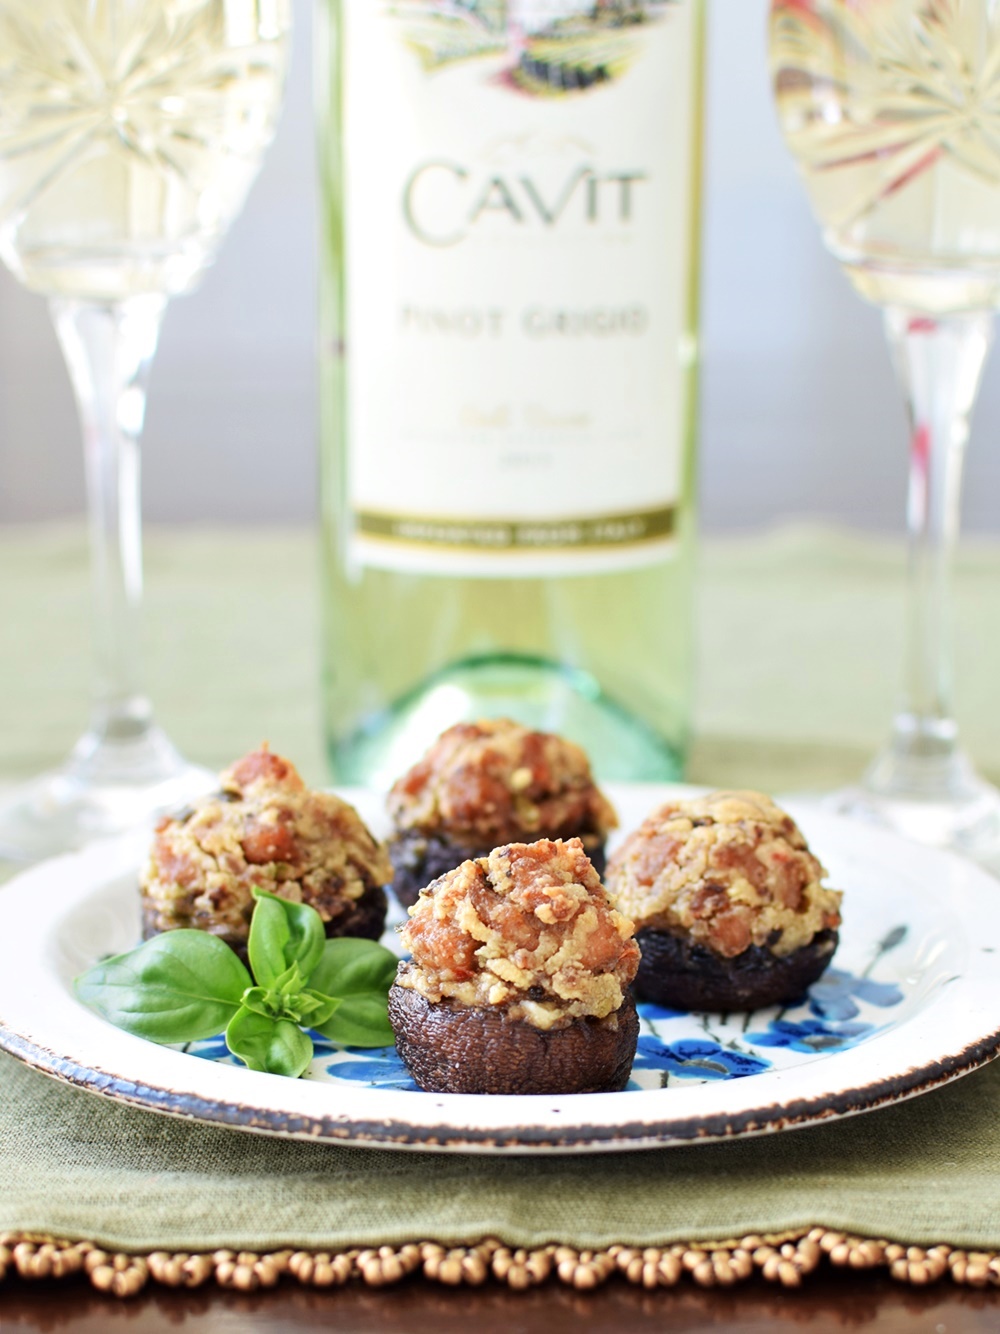 Rich Italian Paleo Stuffed Mushrooms - made healthier with gluten-free chicken sausage, yet luxurious with dairy-free nut cream, these will impress ALL of your guests. They've been served at many parties and raved about by all. 